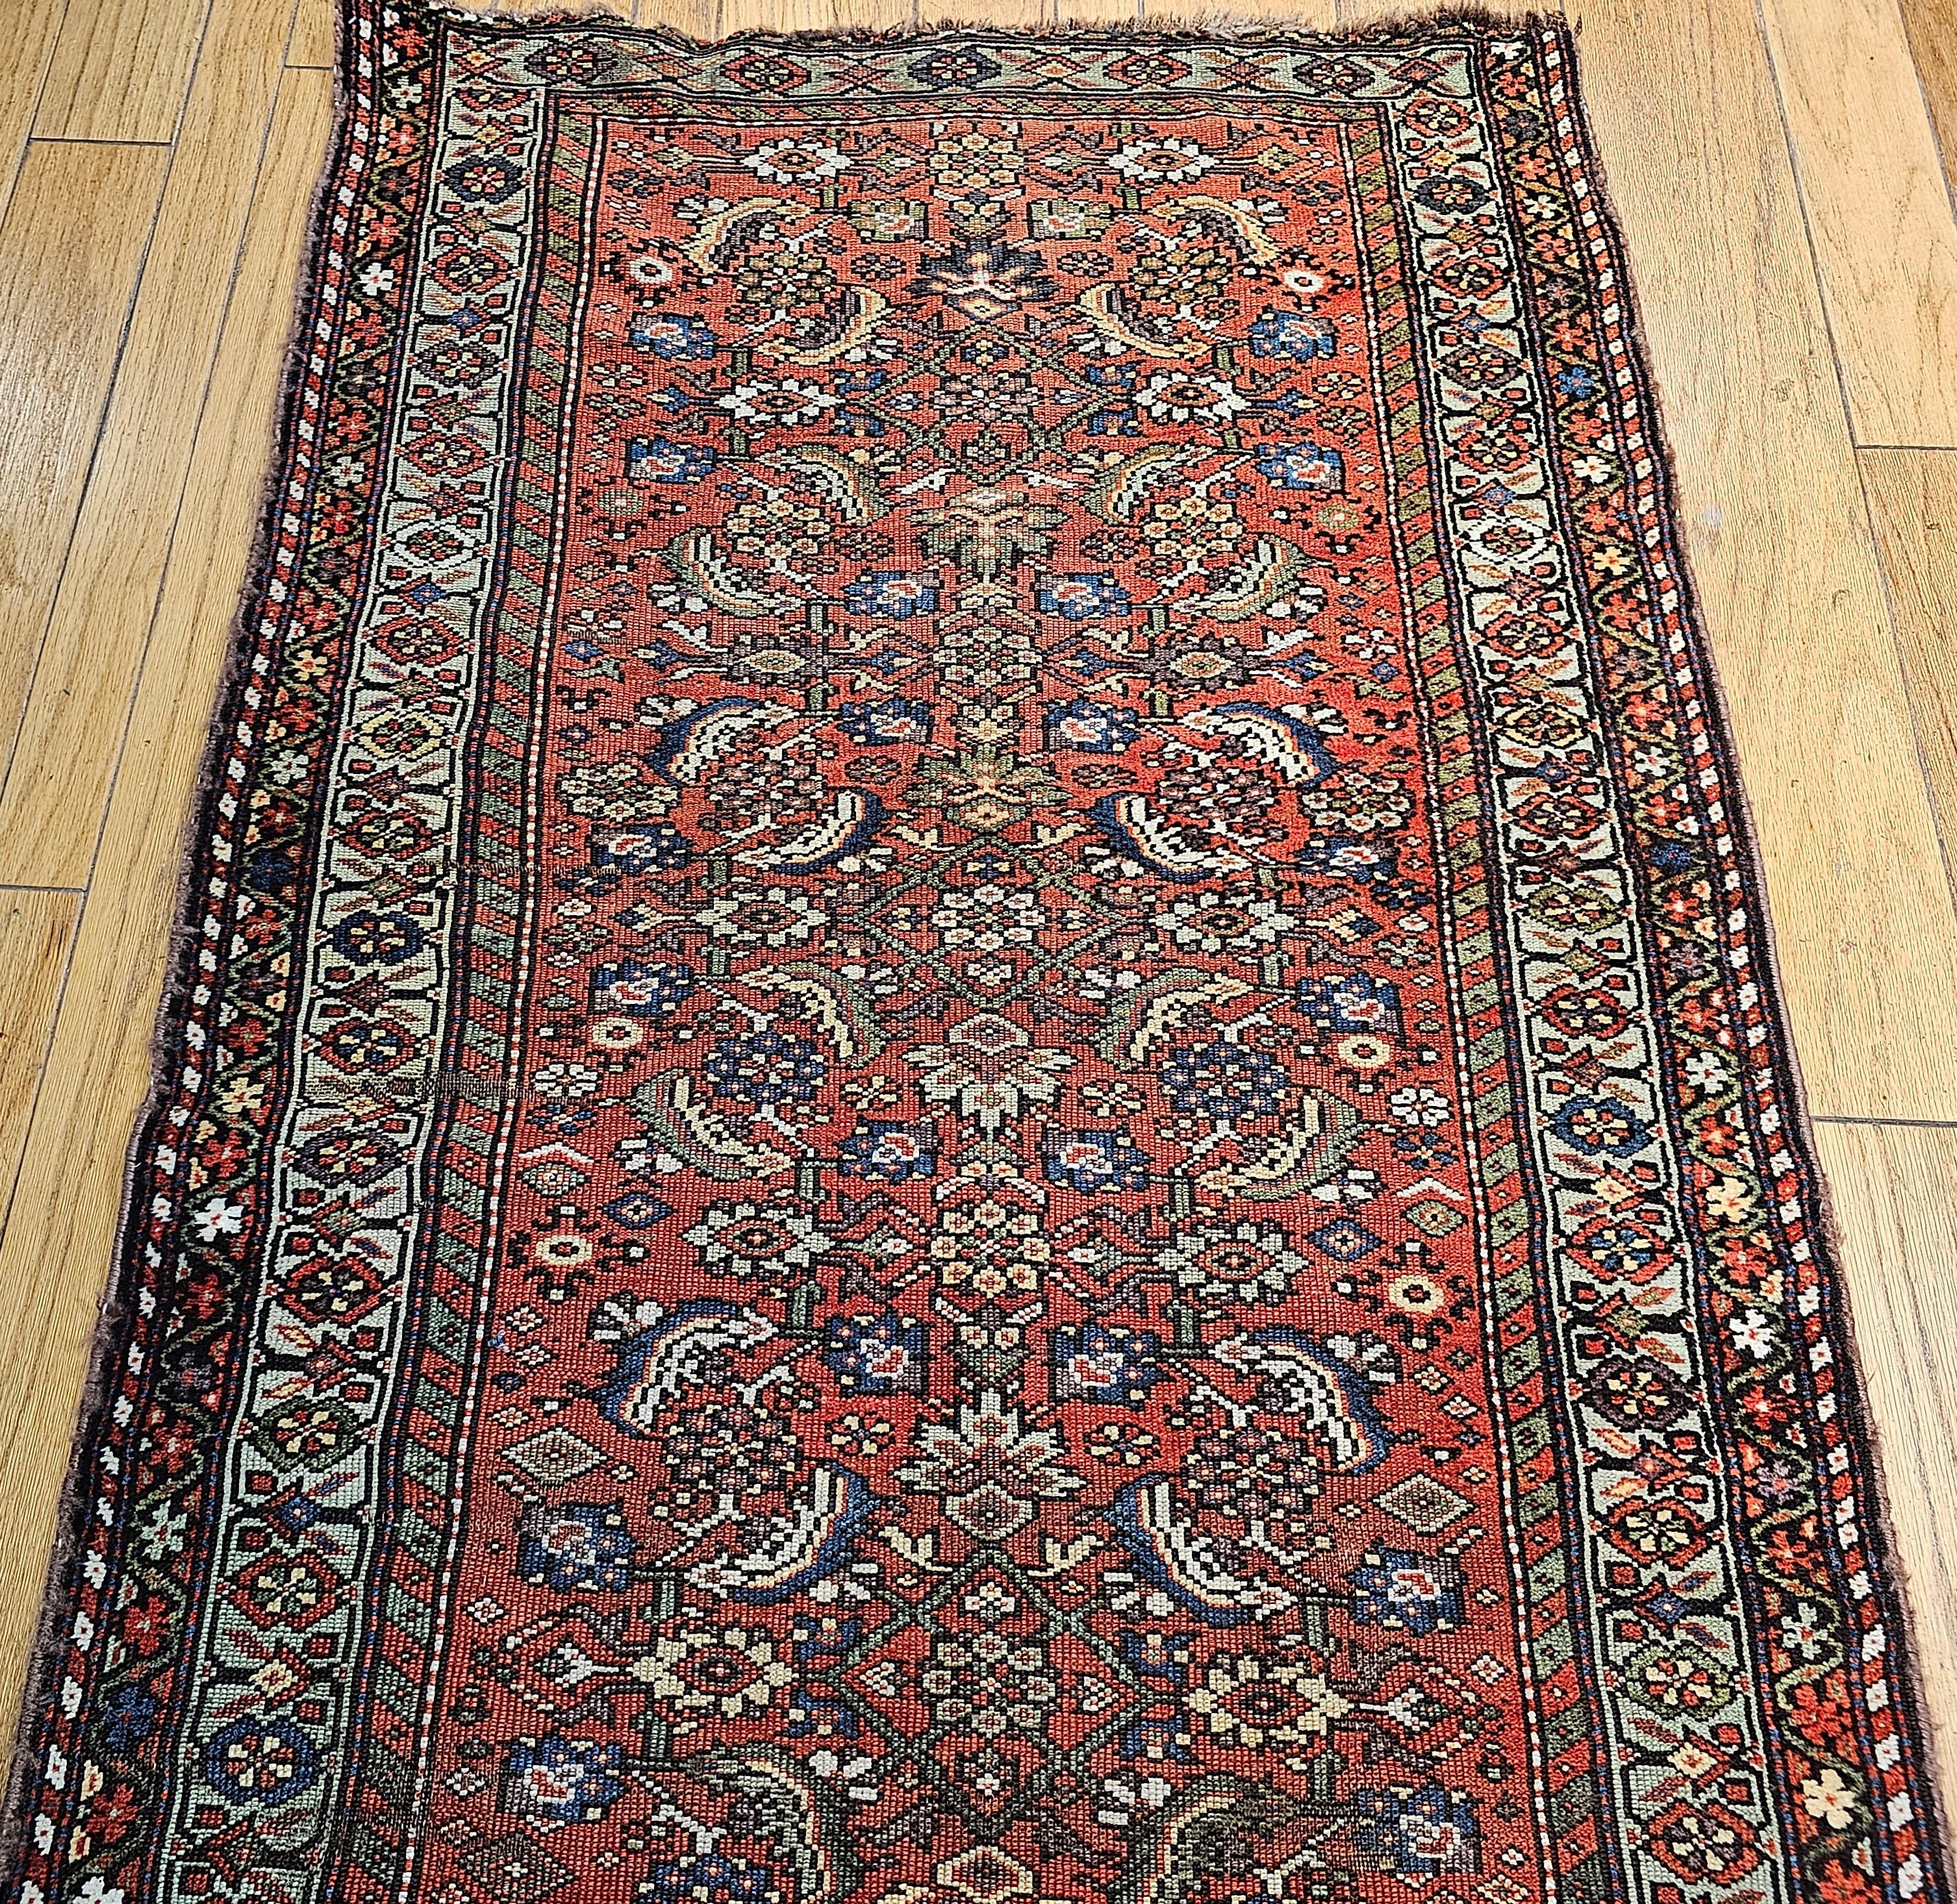 Beautiful Persian Farahan wide runner from the late 1800s. The Herati pattern on the rust red background with a pistachio color border which is unique and rare brings a combination together. The field in this Farahan wide runner contains Herati